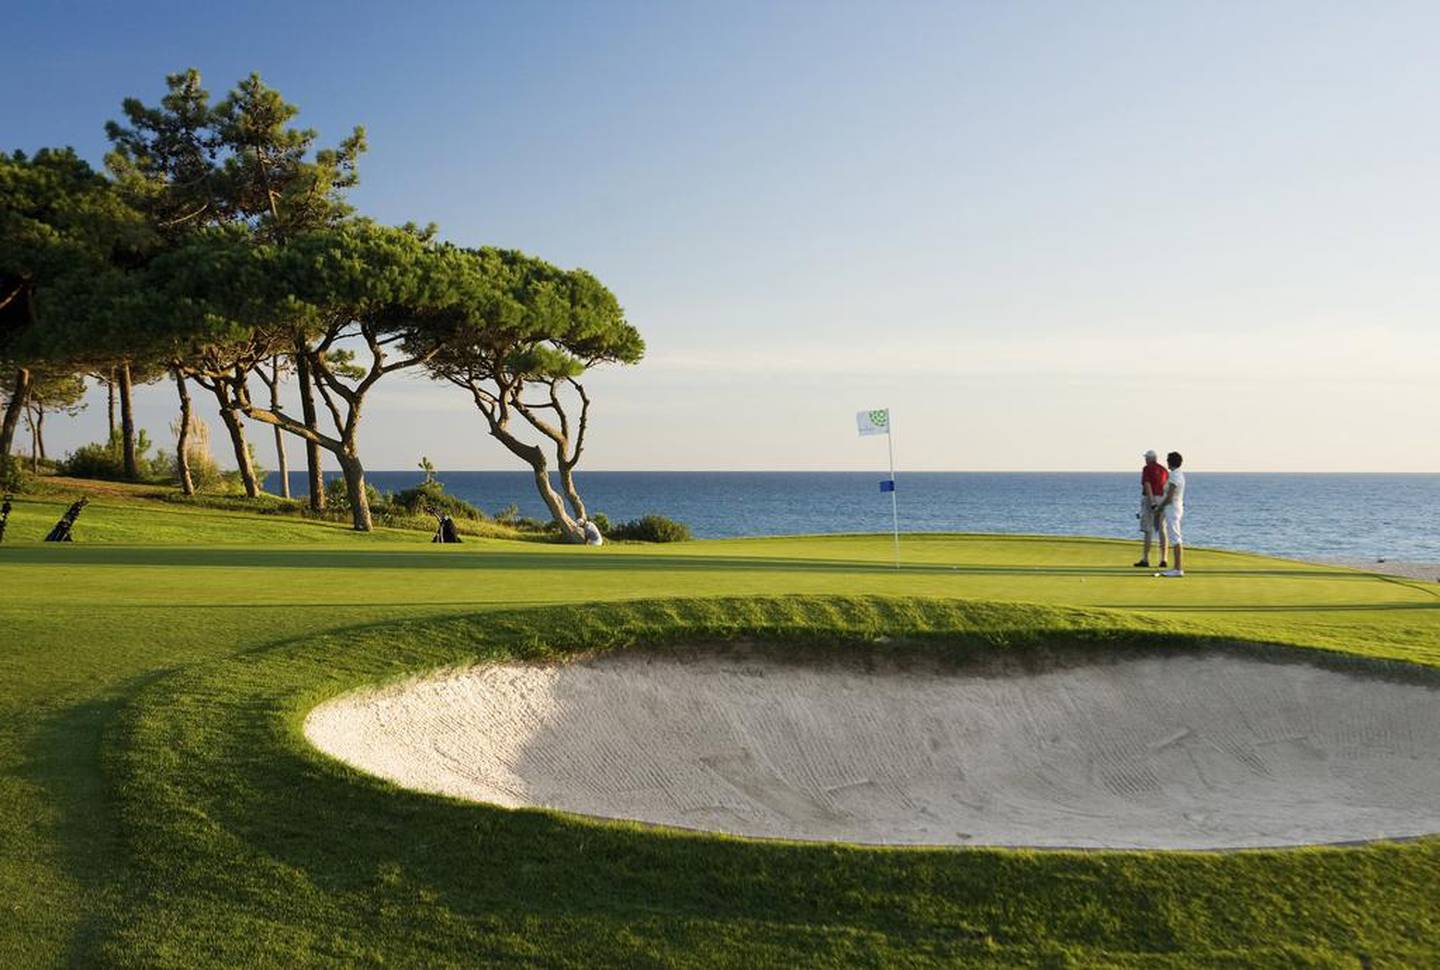 Vale do Lobo Ocean golf course at Hotel Quinta do Lago in Algarve, Portugal. Photo: The Leading Hotels of the World